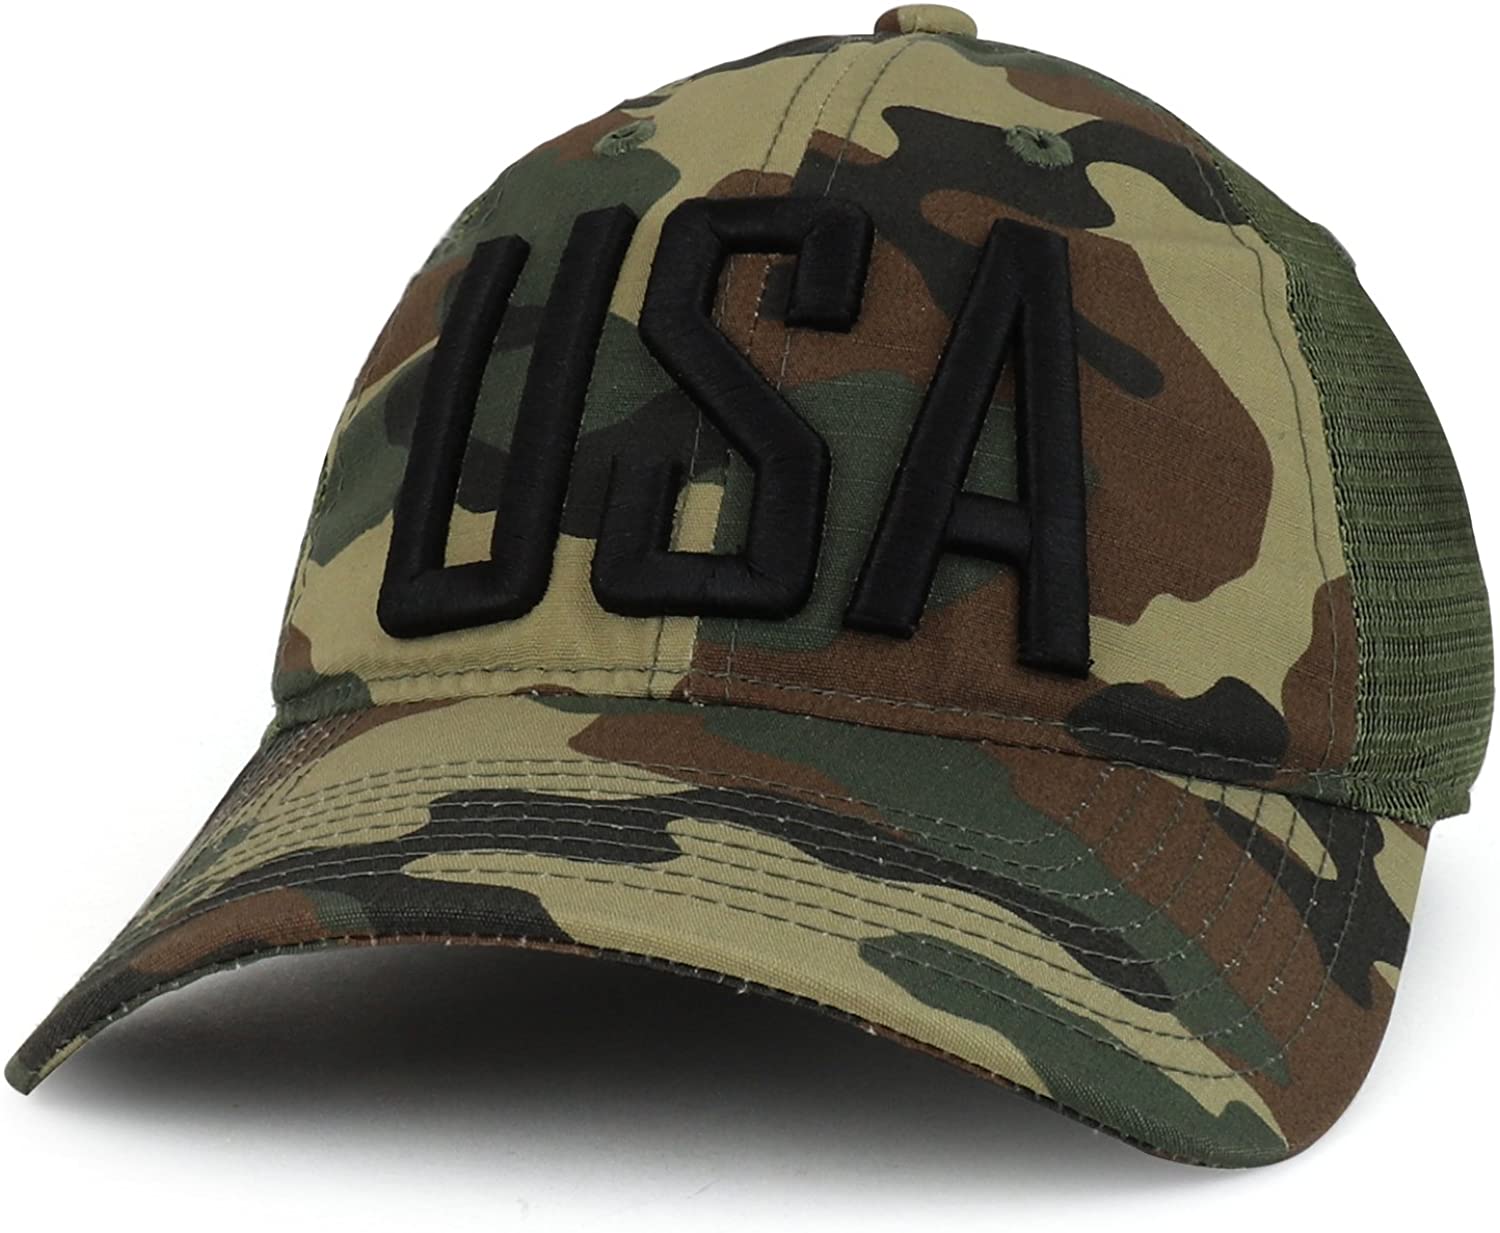 Armycrew USA Text 3D Embroidered Ripstop Trucker Mesh Back Cap - ACU